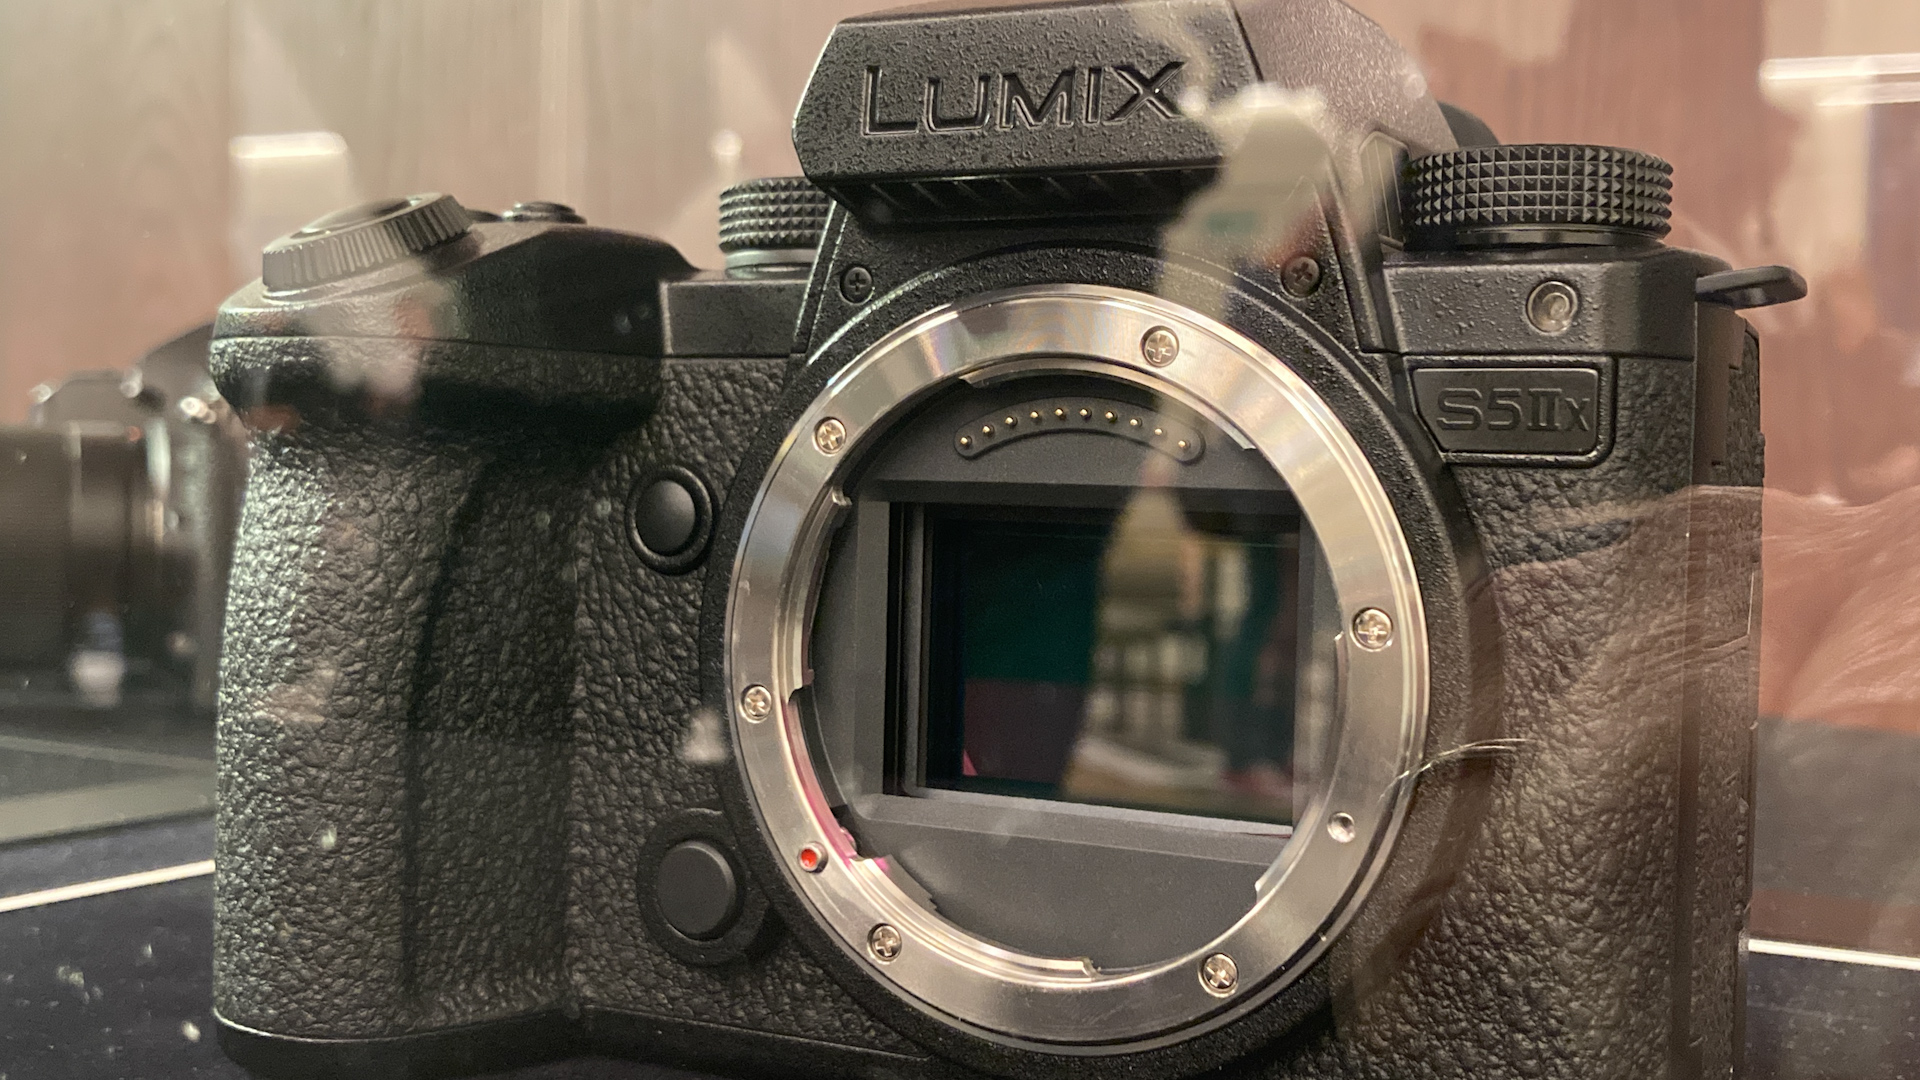 Panasonic LUMIX S5 II Review - Finally With a Very Capable Autofocus System